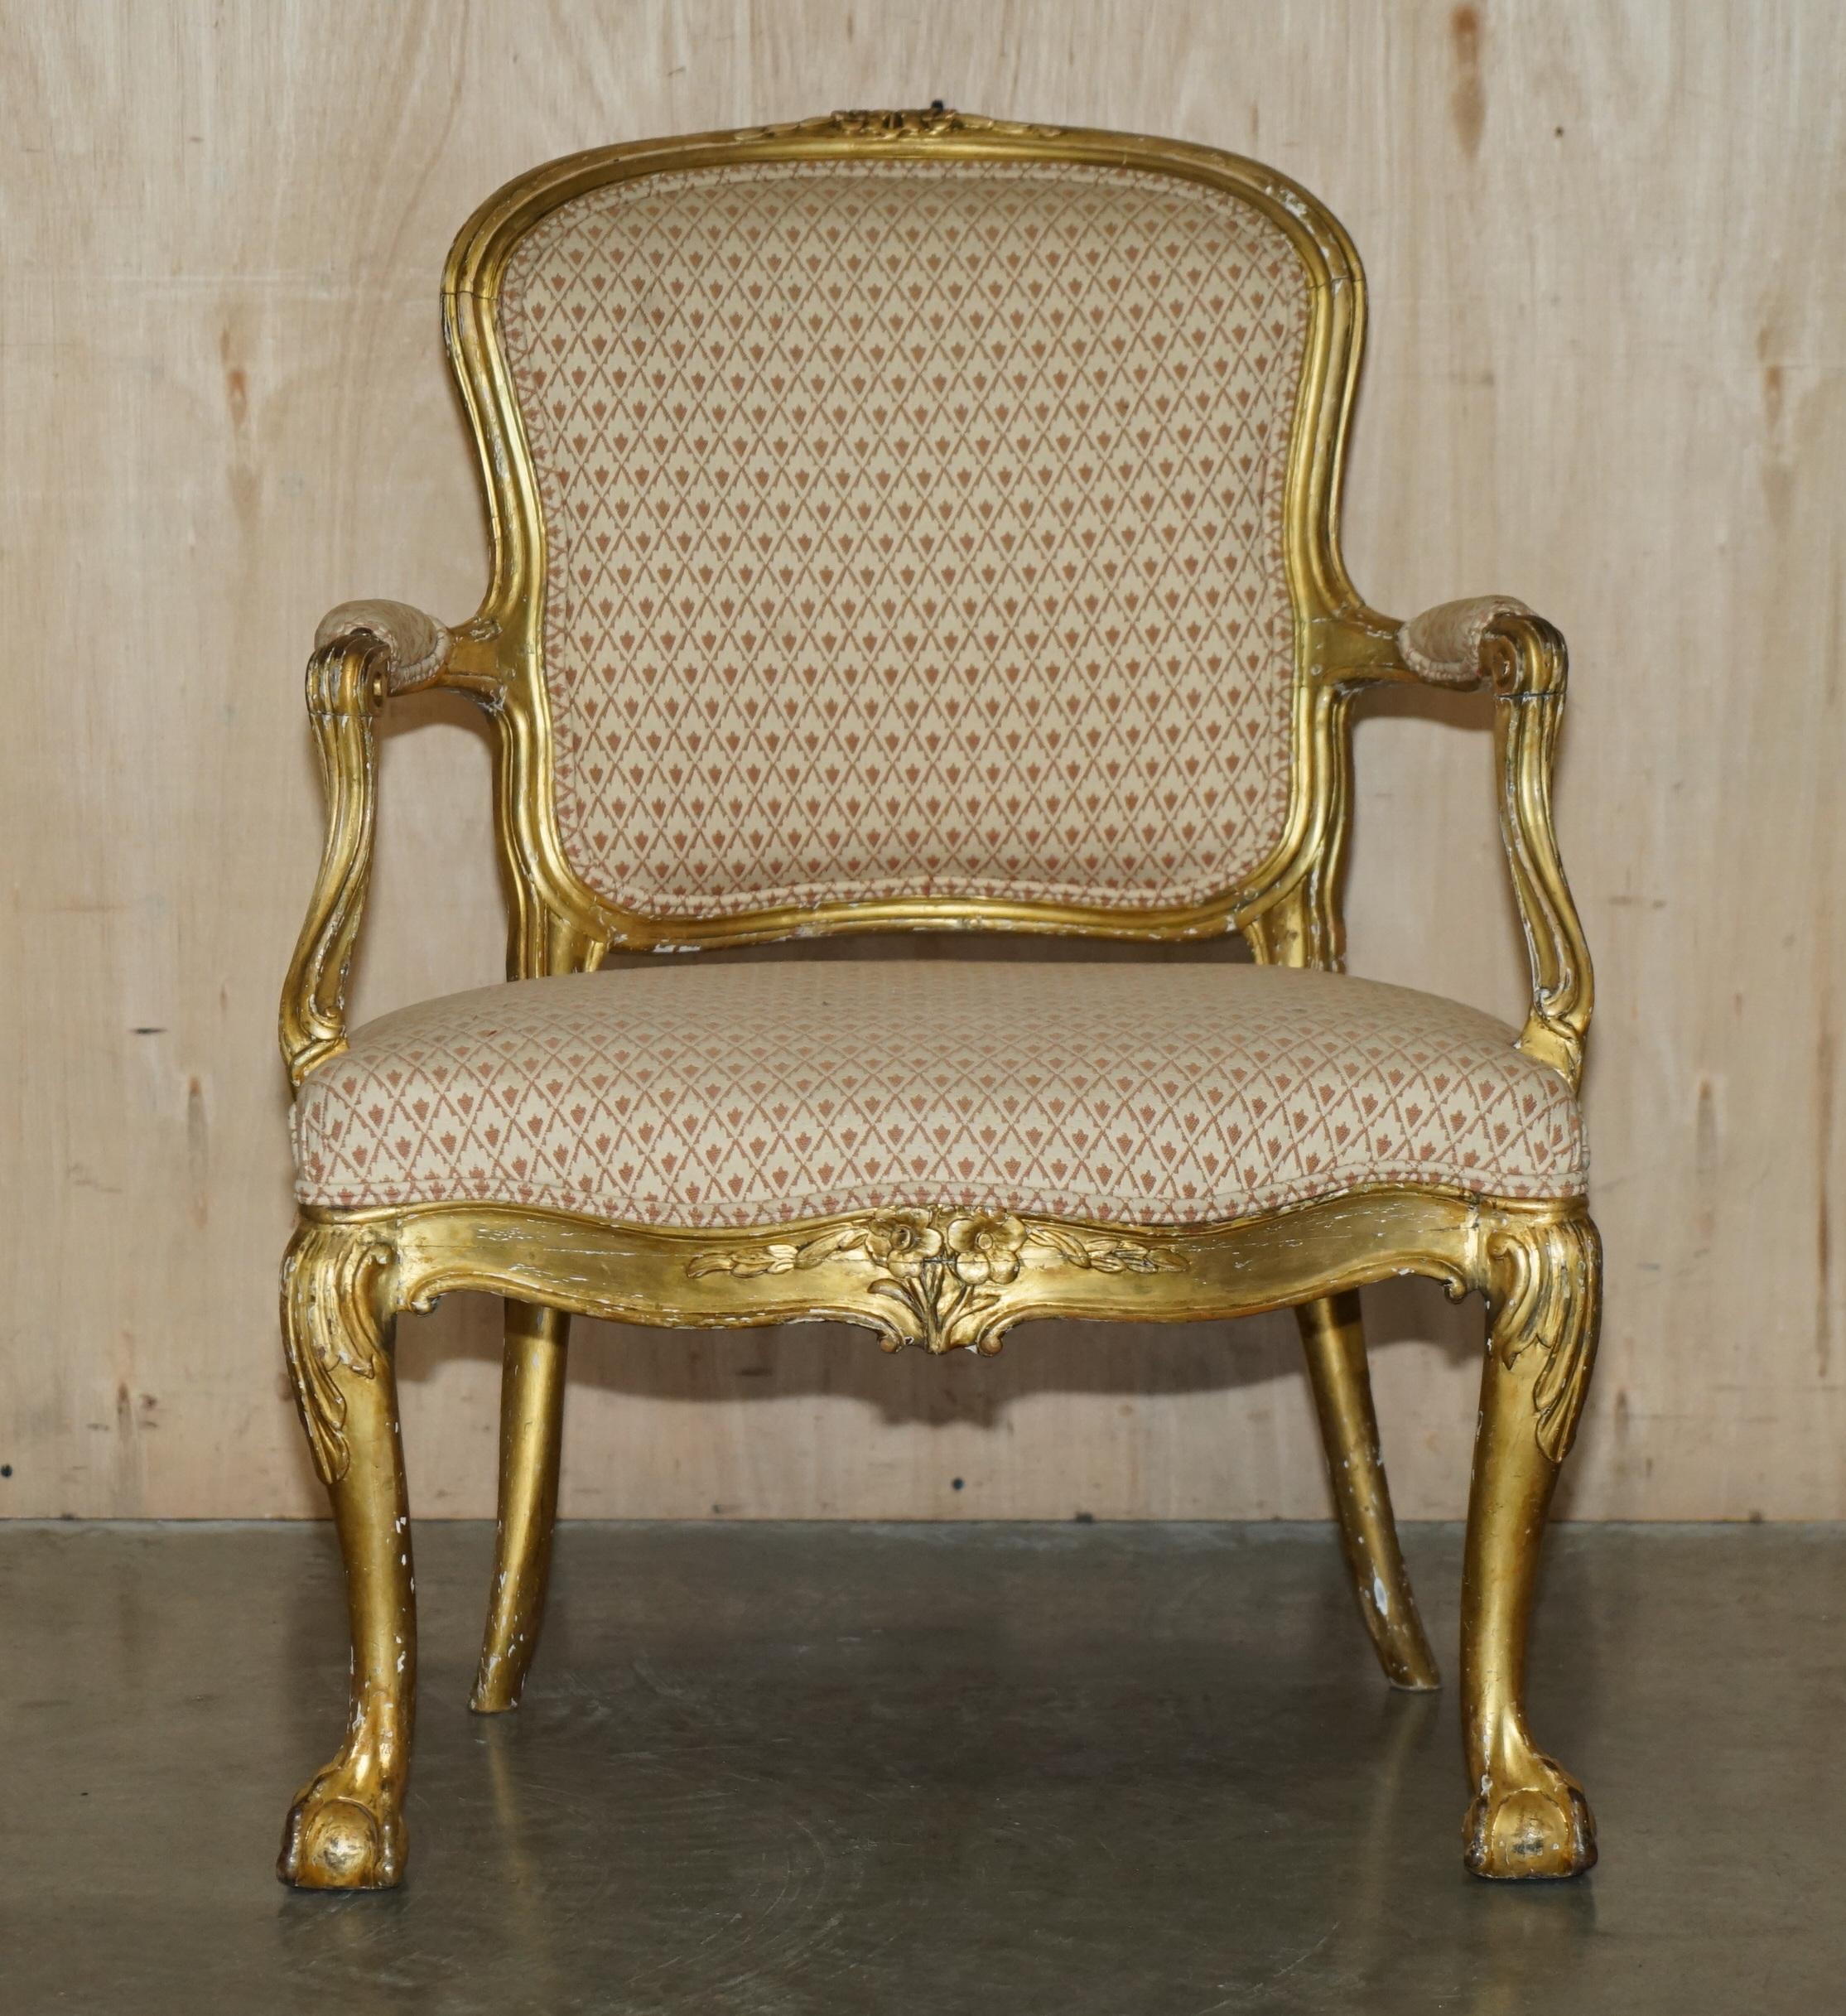 Royal House Antiques

Royal House Antiques is delighted to offer for sale this stunning, late 18th century circa 1790 French gold giltwood, Claw & Ball Cabriolet legged Bergère armchair 

Please note the delivery fee listed is just a guide, it